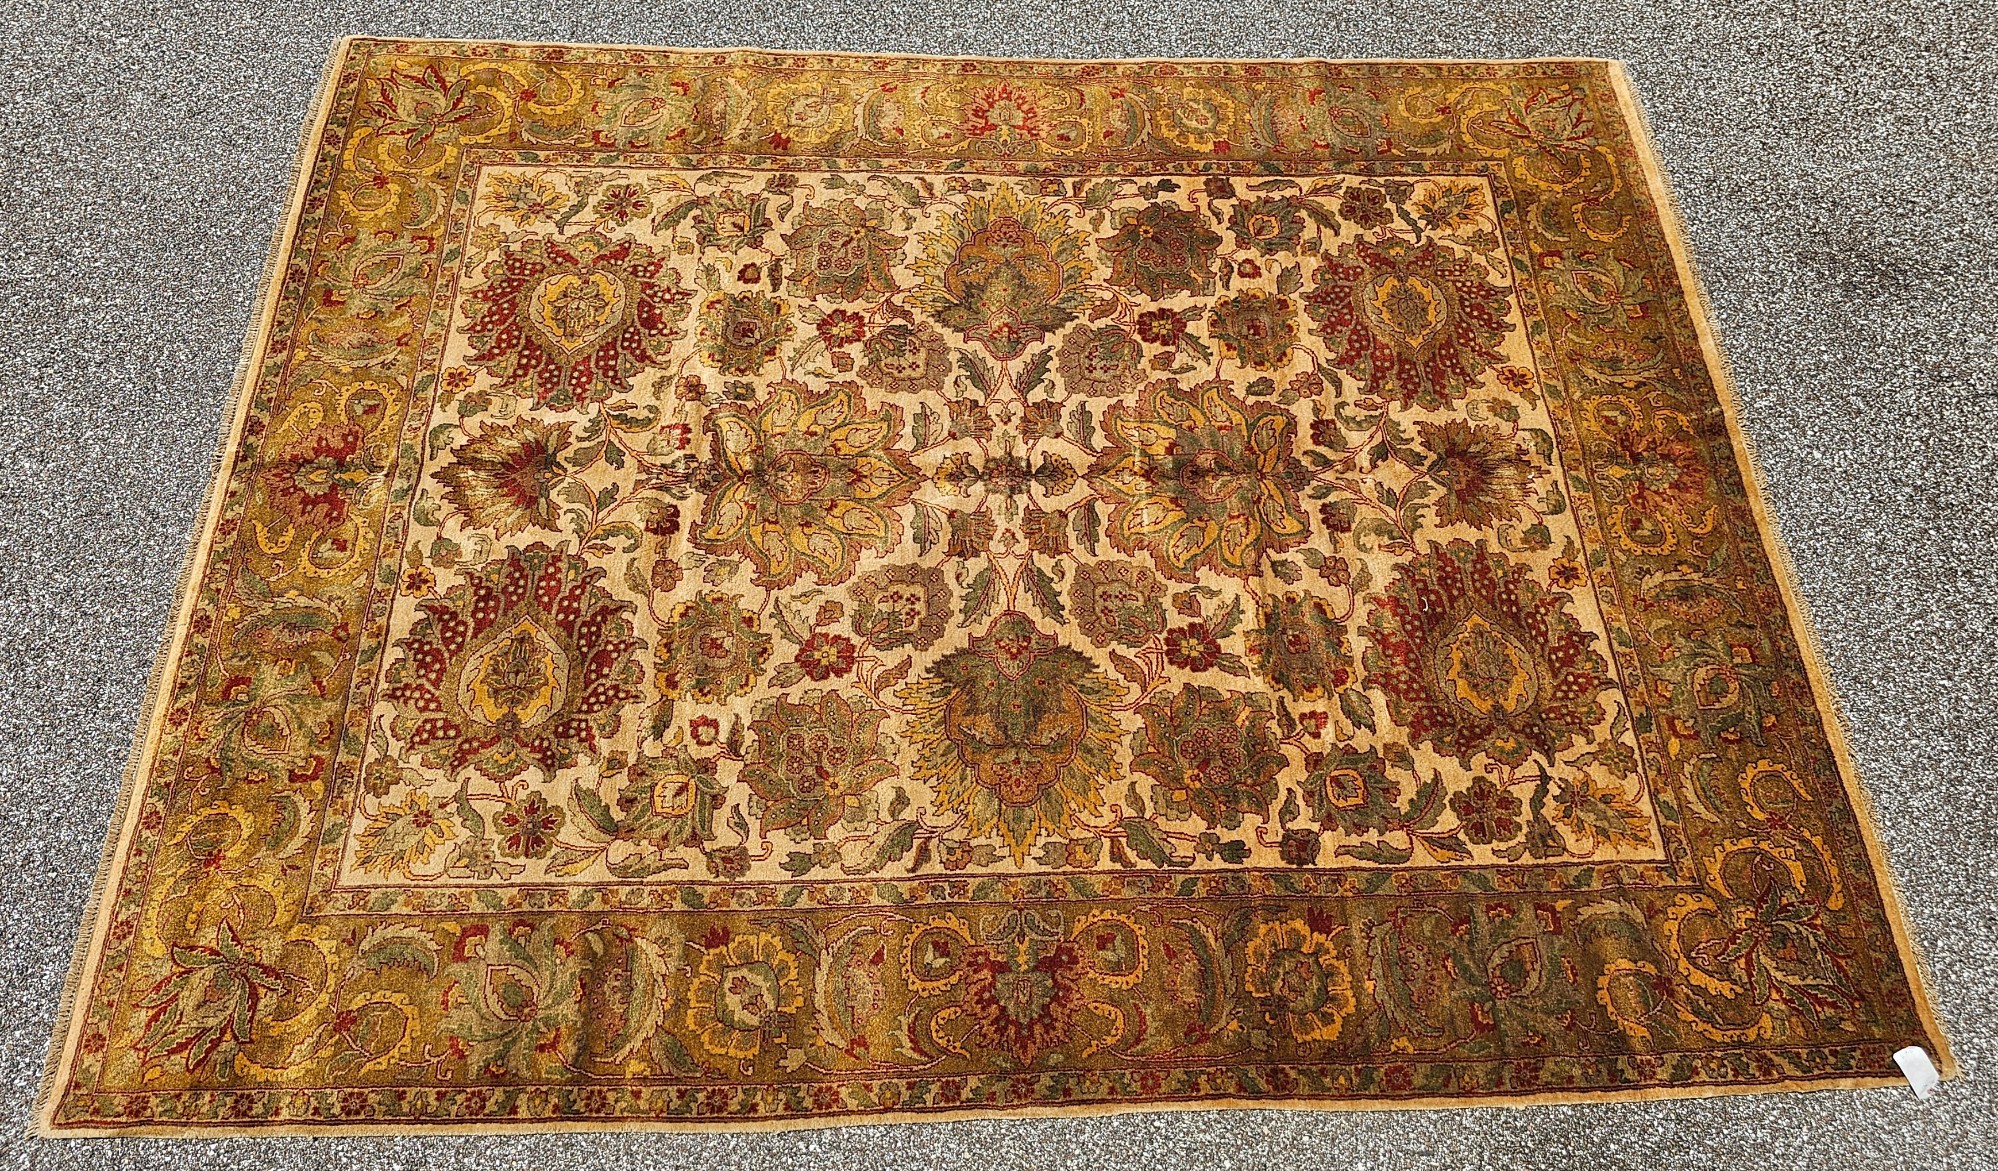 Fine Mahal Hand-Knotted Wool Rug - 9' x 11'10" - Image 2 of 9